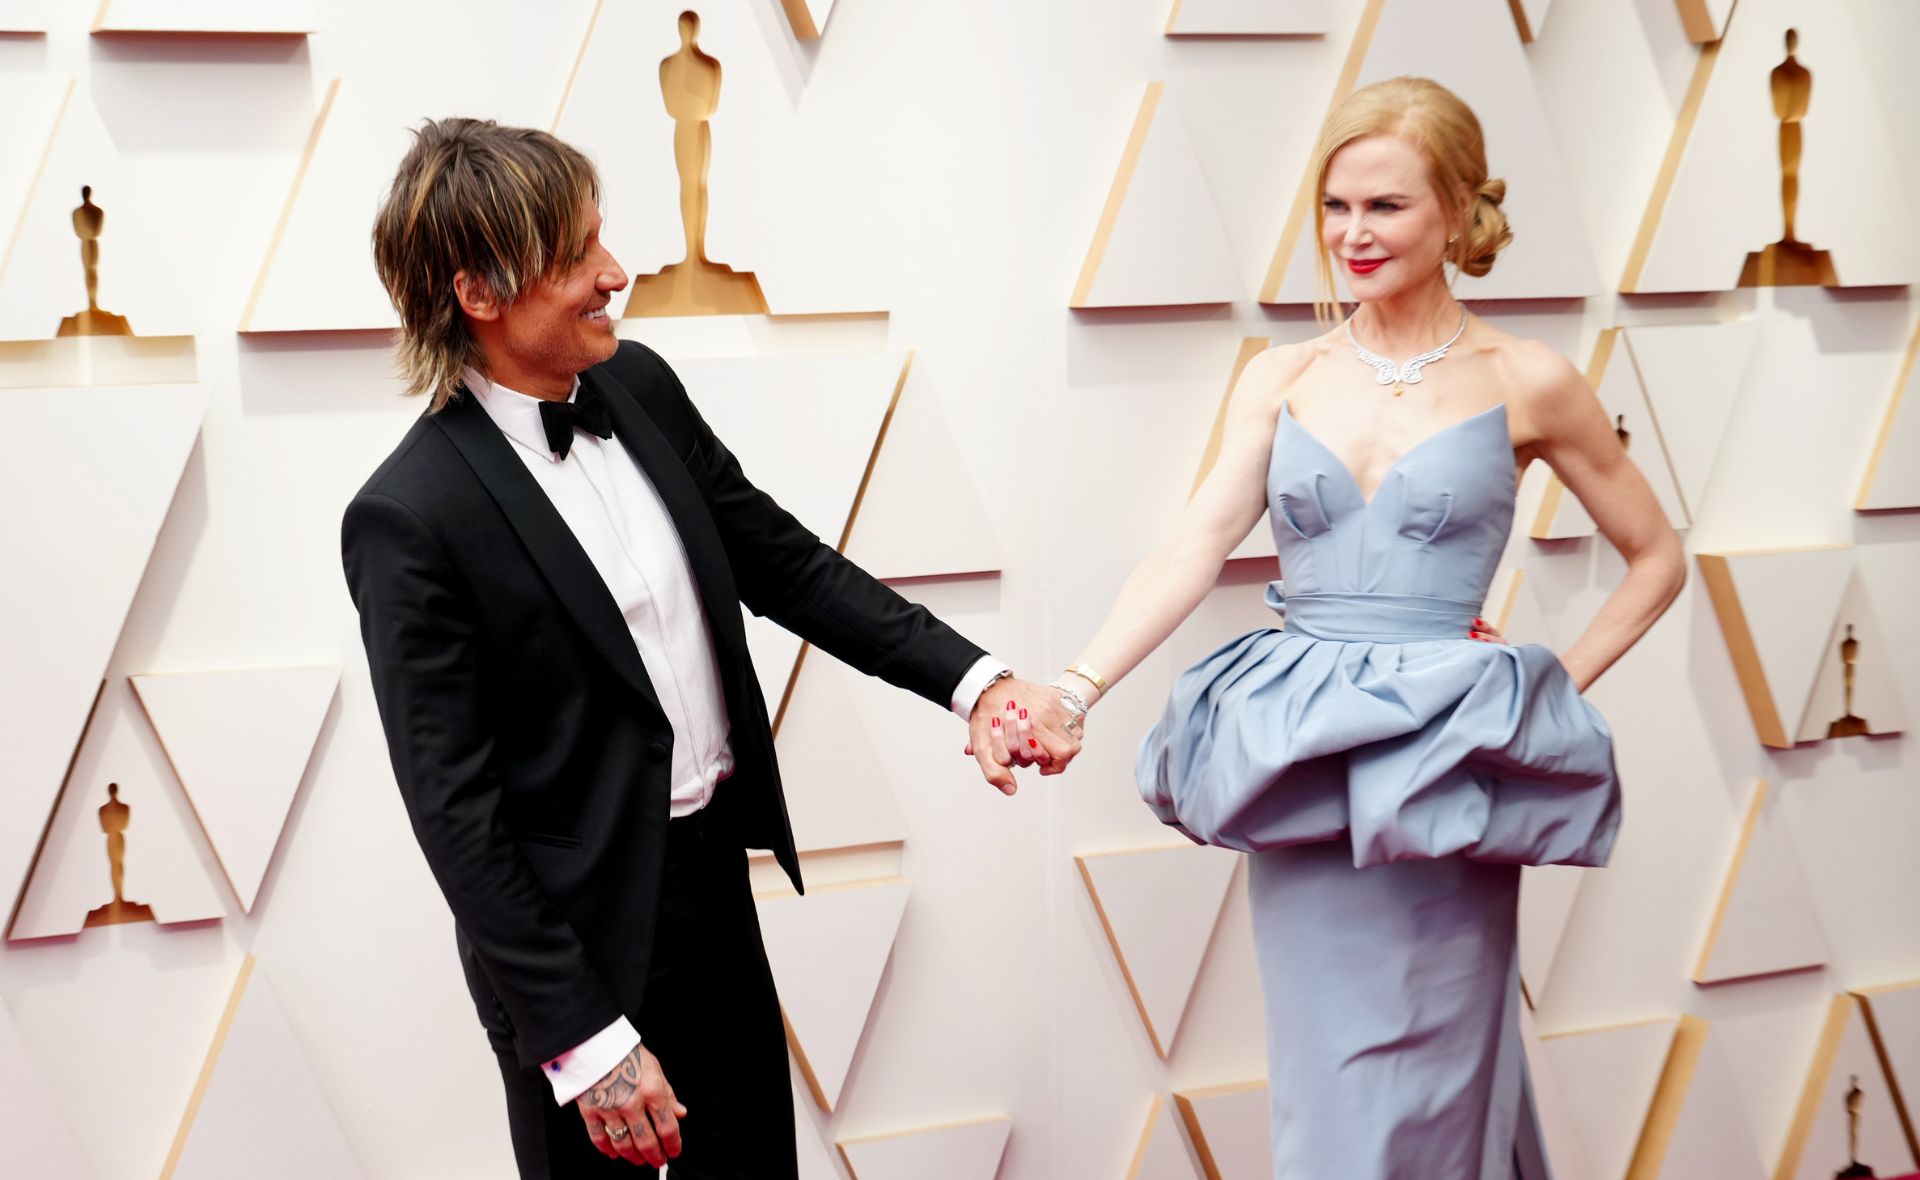 It’s time to settle down! Keith Urban could return to Australia permanently for Nicole Kidman